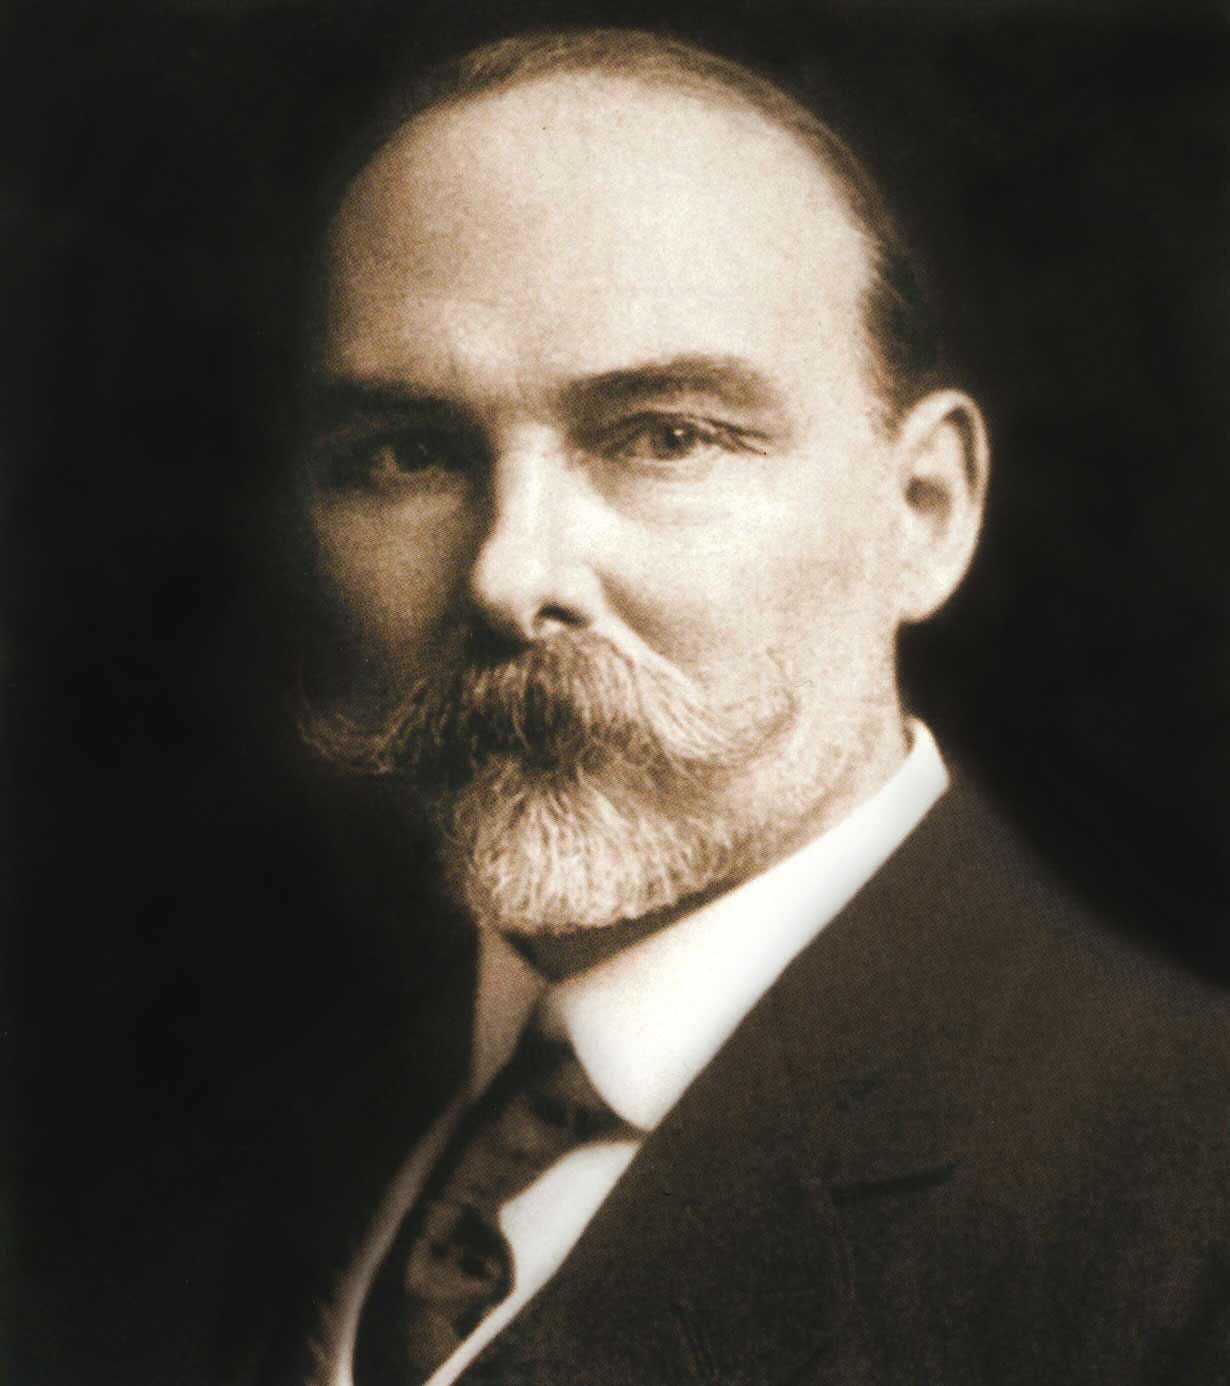 G.R.S. Mead